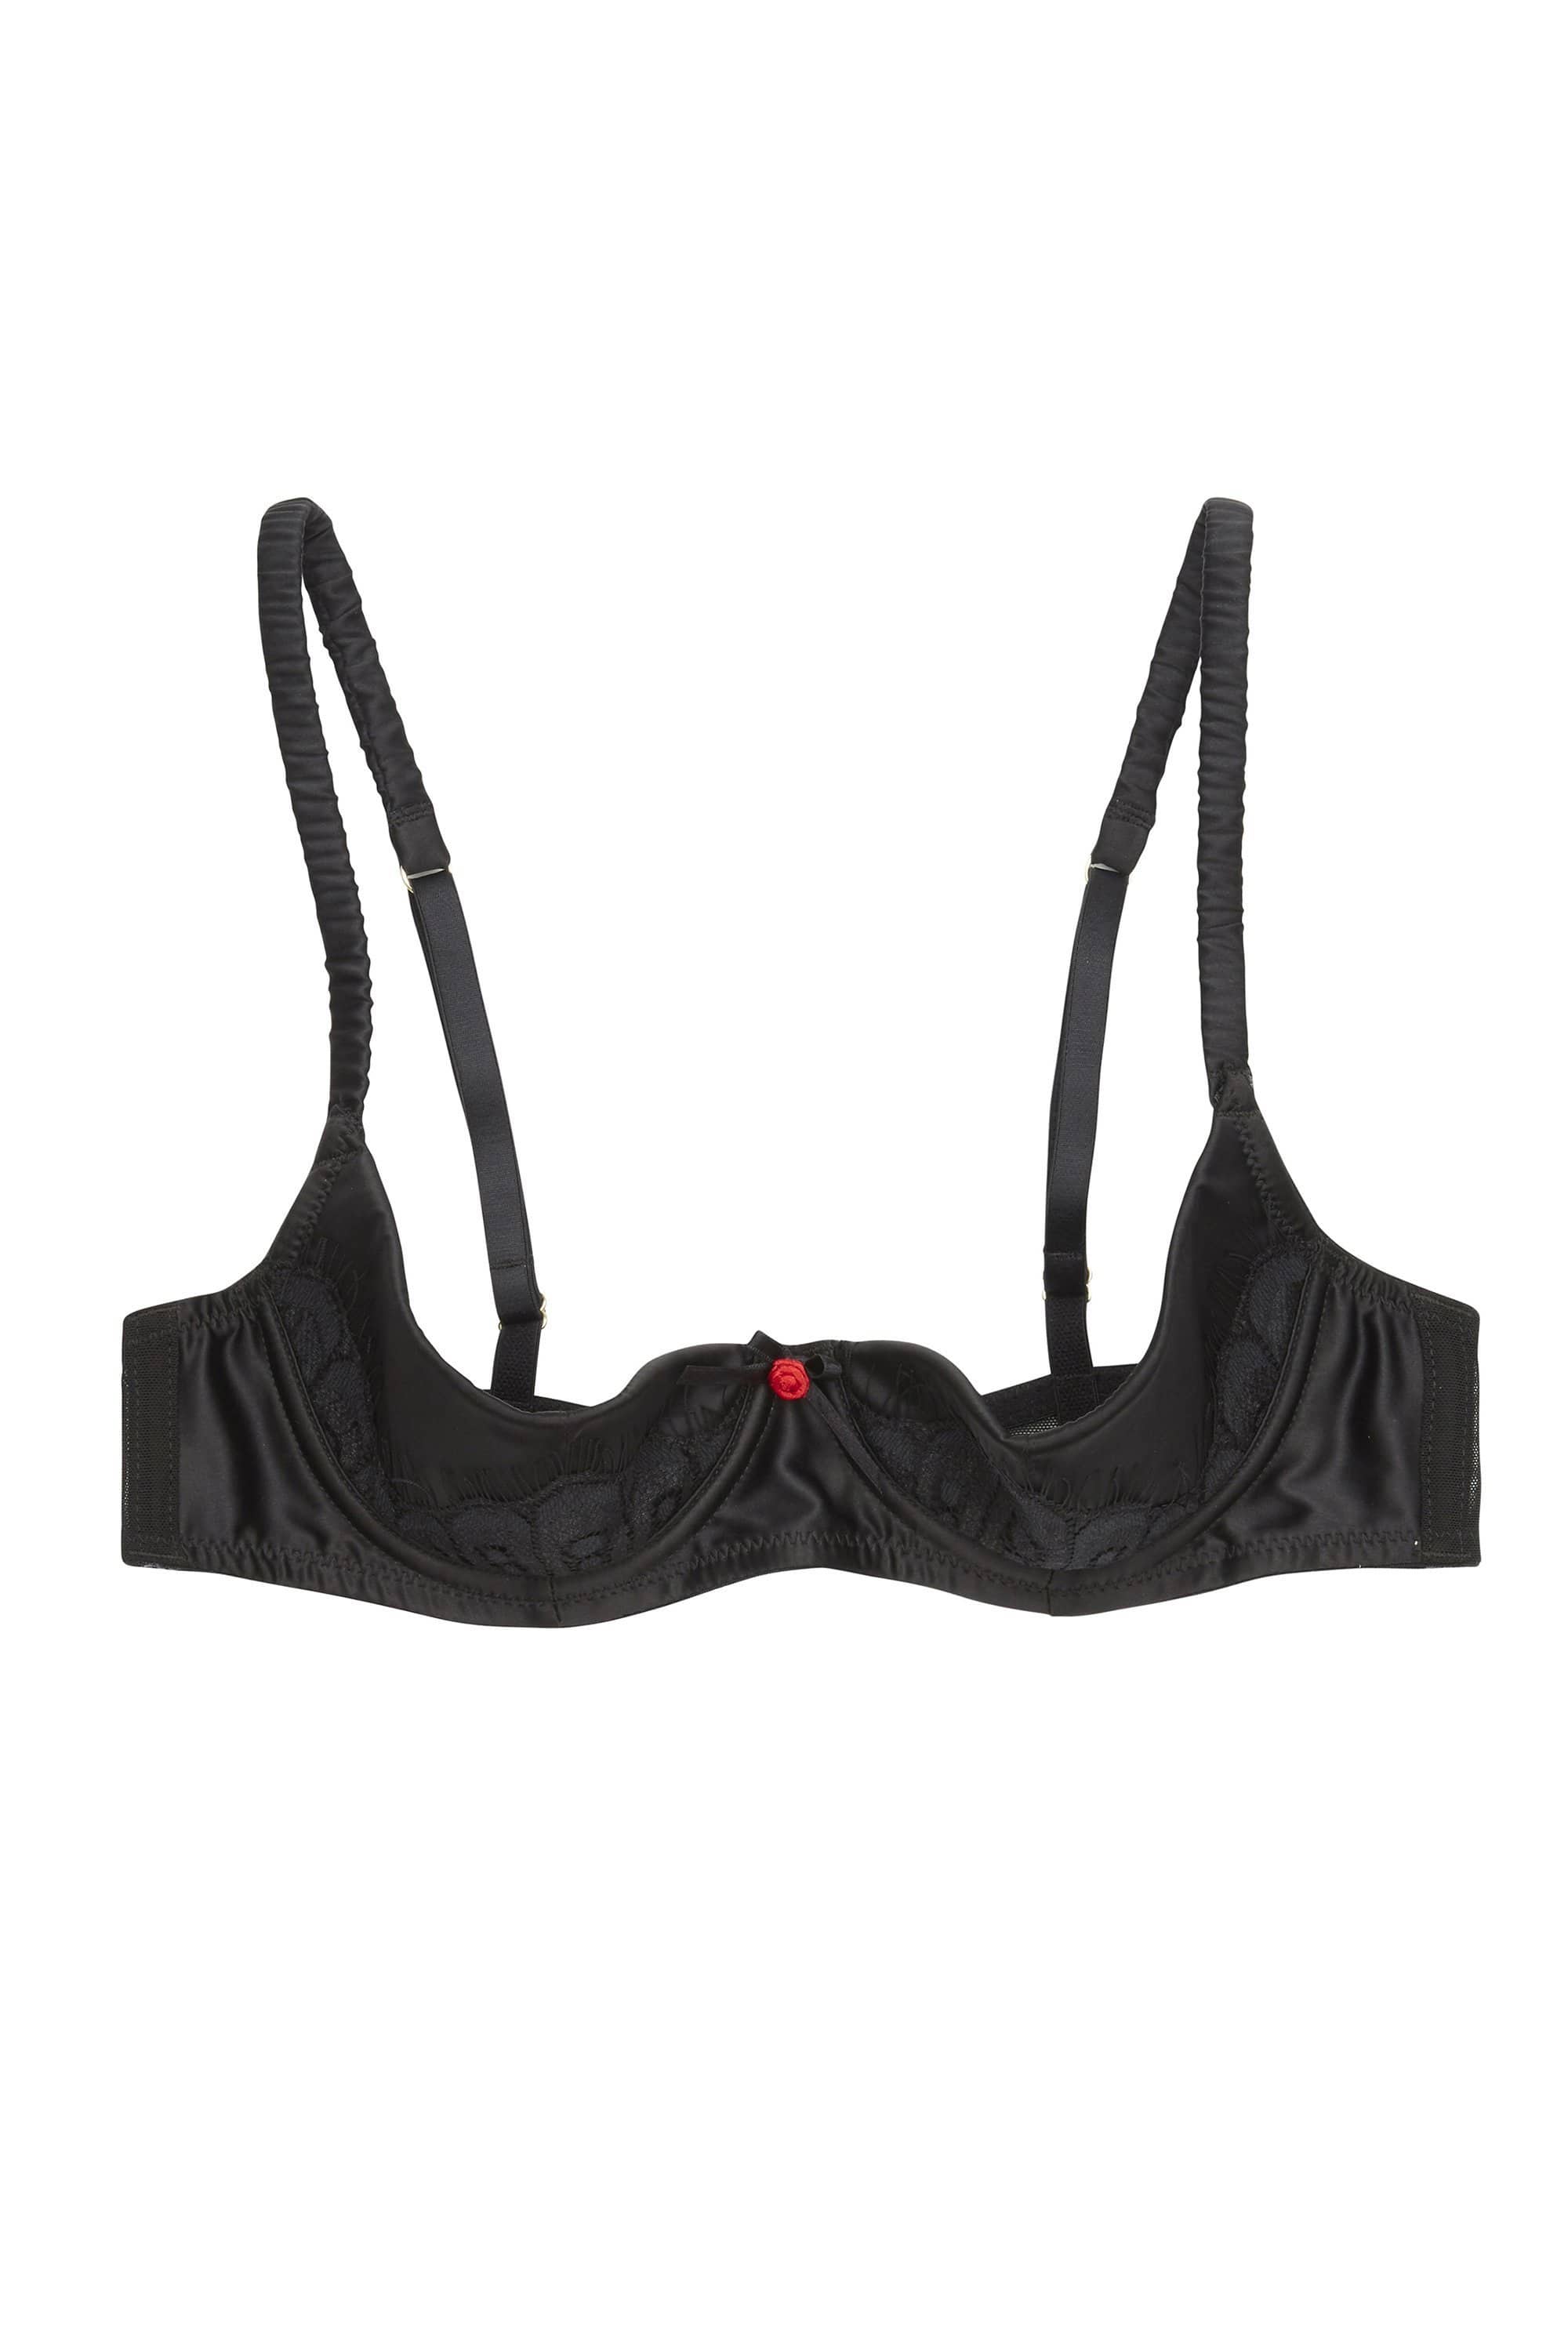 Marlene Black 1/4 Cup bra with Lace Curve